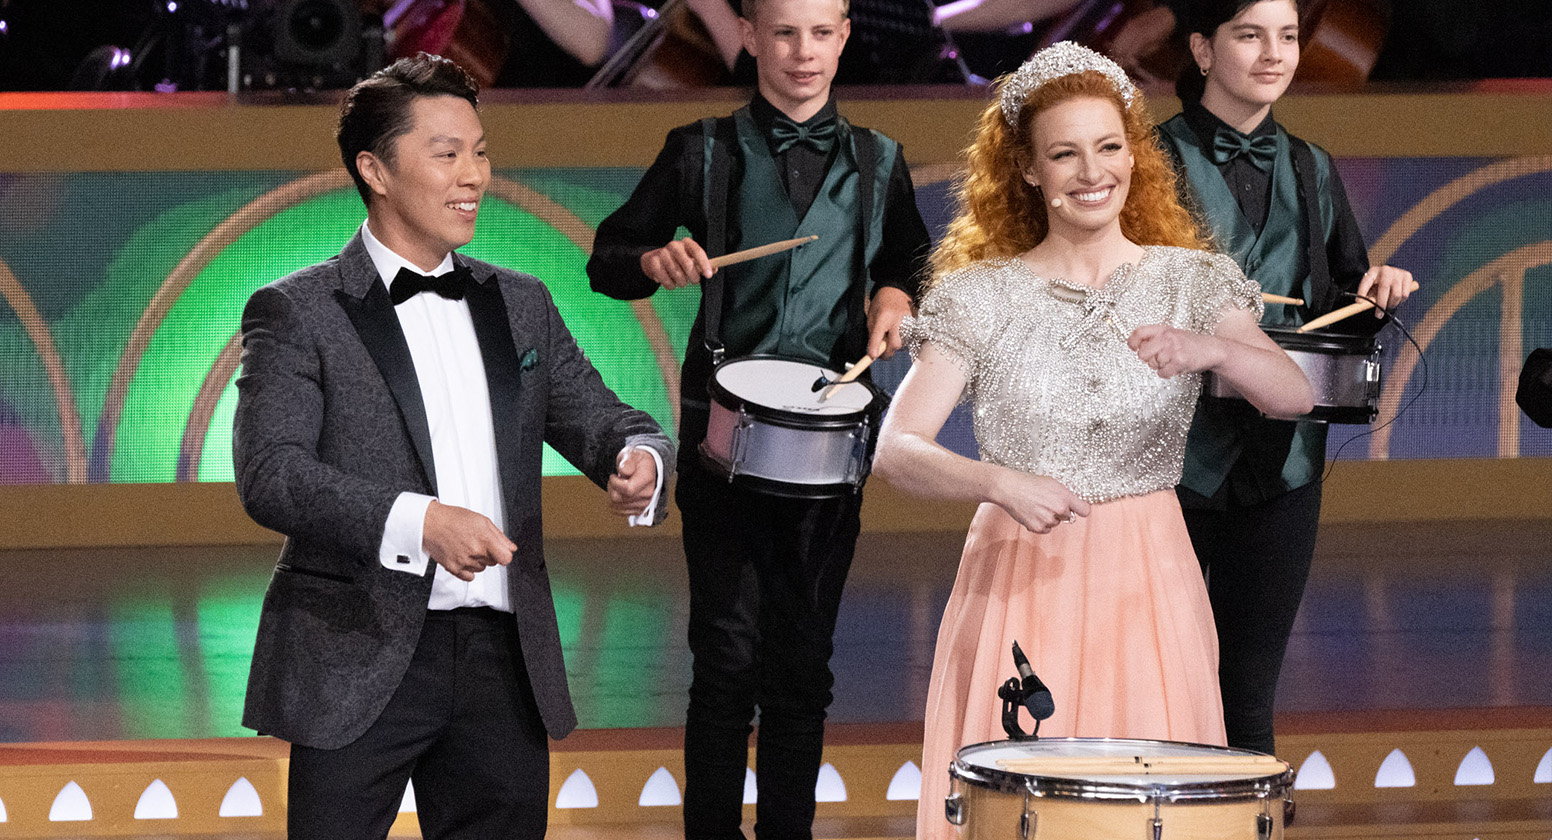 Emma Watkins and Elvin Melvin playing the drums at Carols by Candlelight